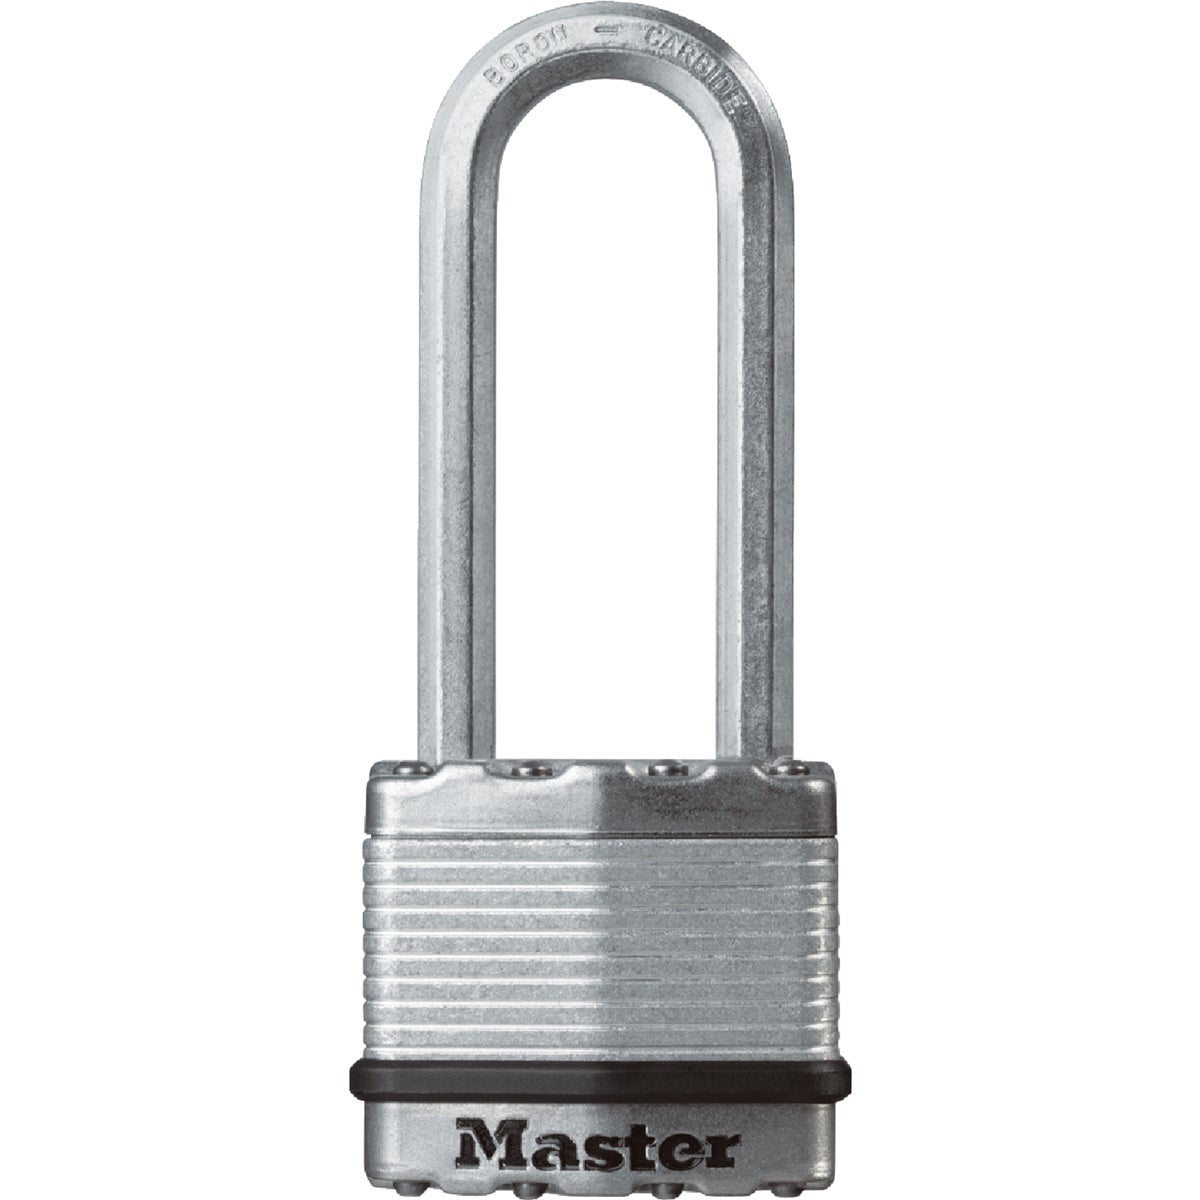 Master Lock Magnum 1-3/4 In. W. Dual-Armor Keyed Alike Padlock with 2-1/2 In. L. Shackle